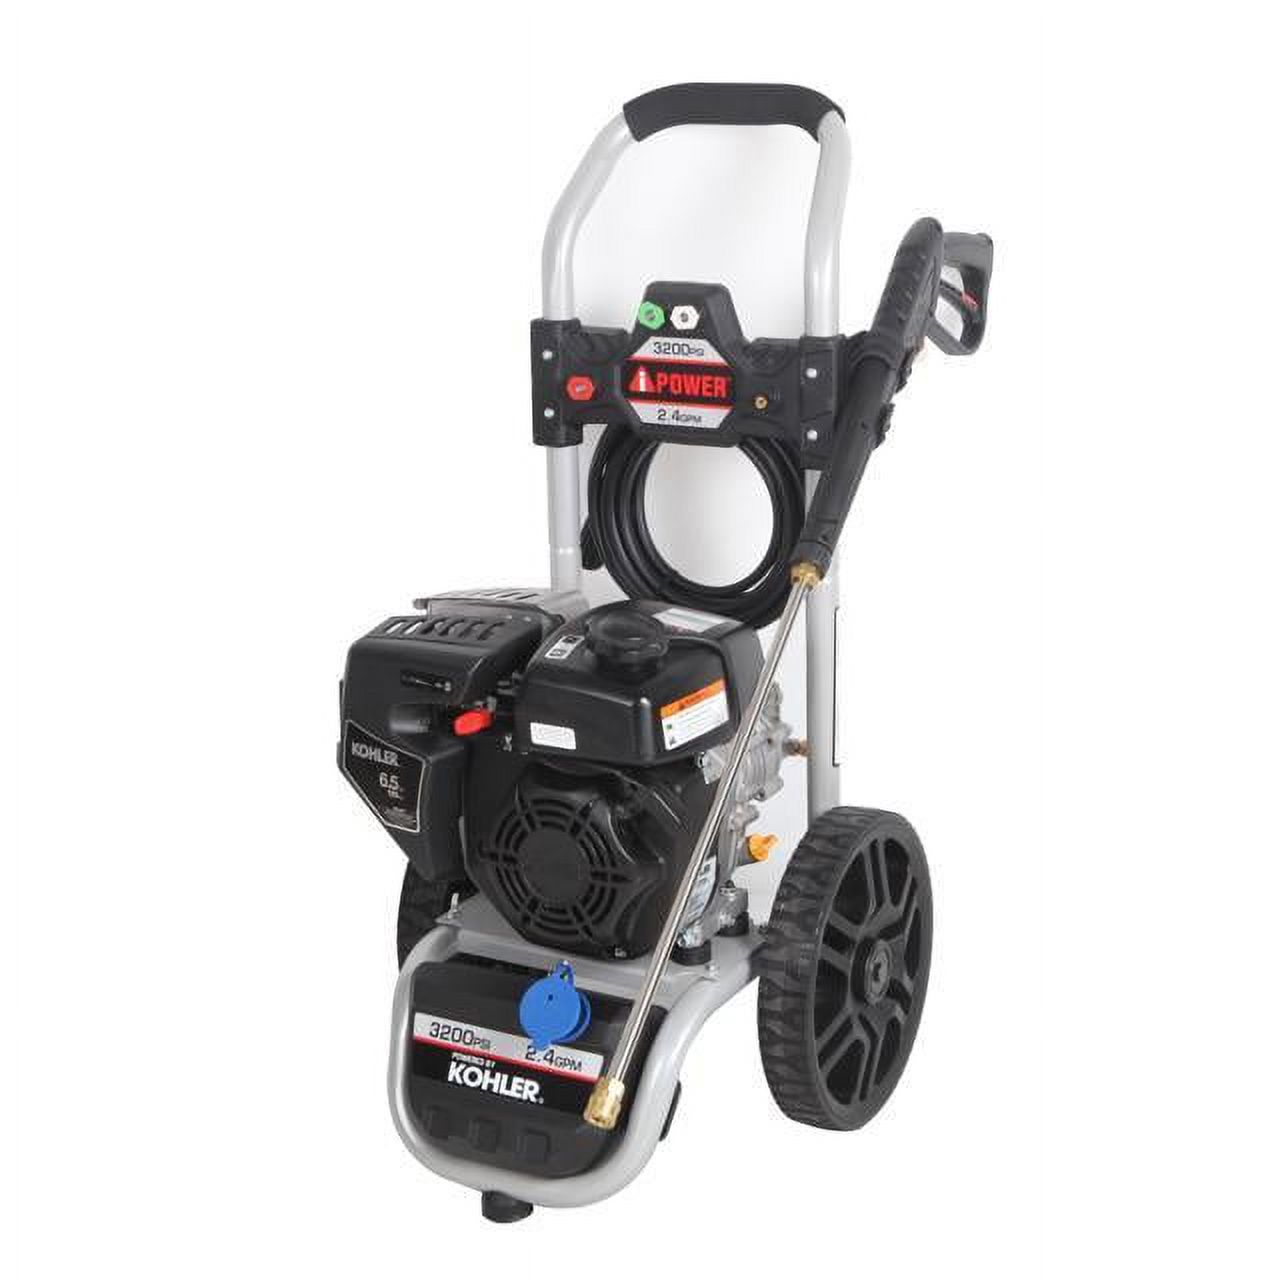 A-IPOWER Power Pressure Washer 3200 PSI Pressure Washer Kohler Engine 2.4 GPM APW3200KH - image 5 of 5